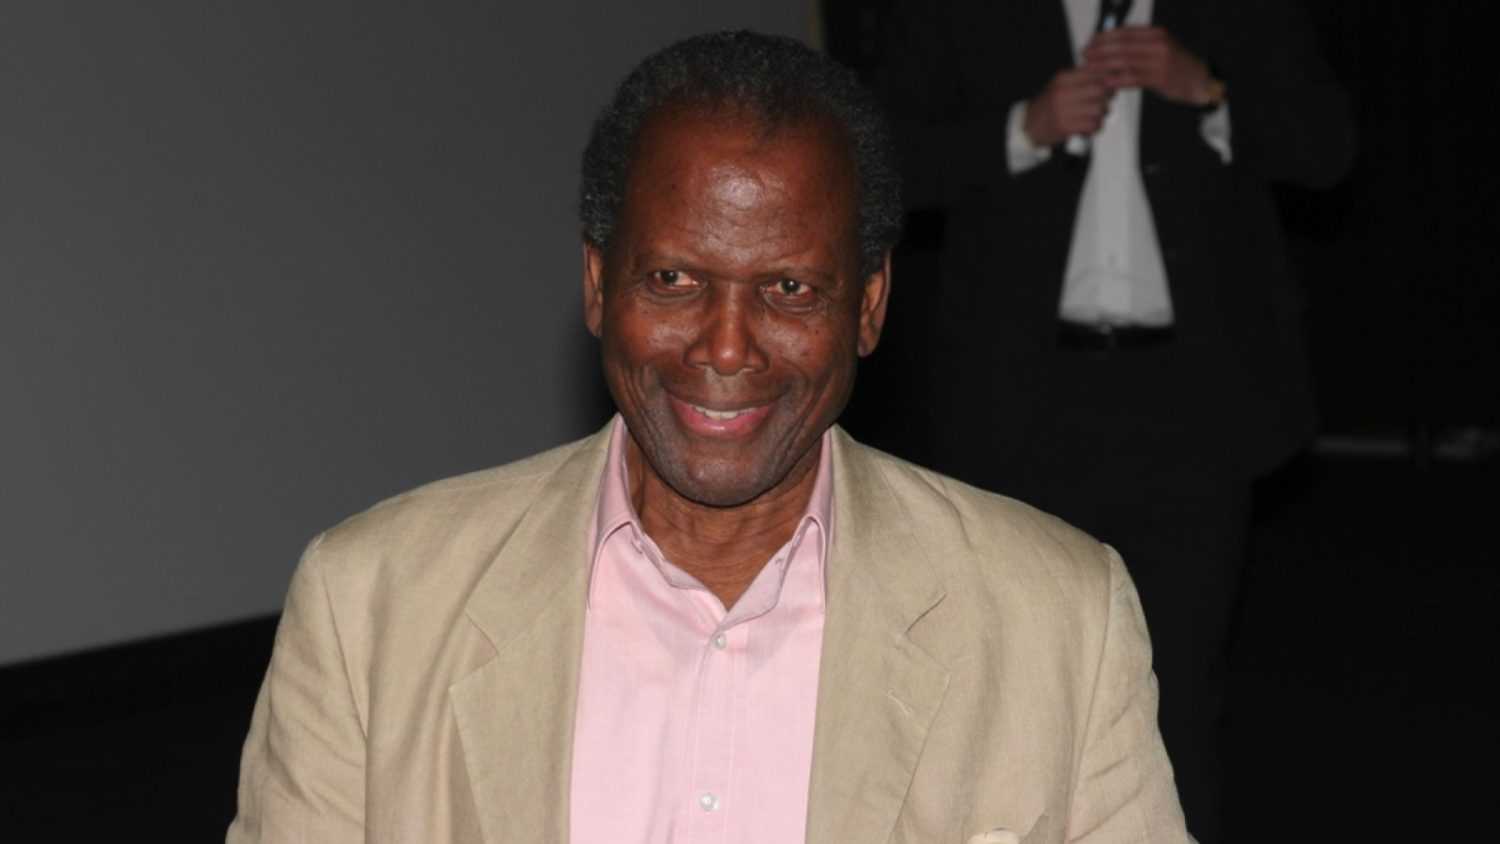 CANNES, FRANCE - MAY 19: Sidney Poitier attends a promoting the film 'Les aventuriers' during the 59th International Cannes Film Festival May 19, 2006 in Cannes, France